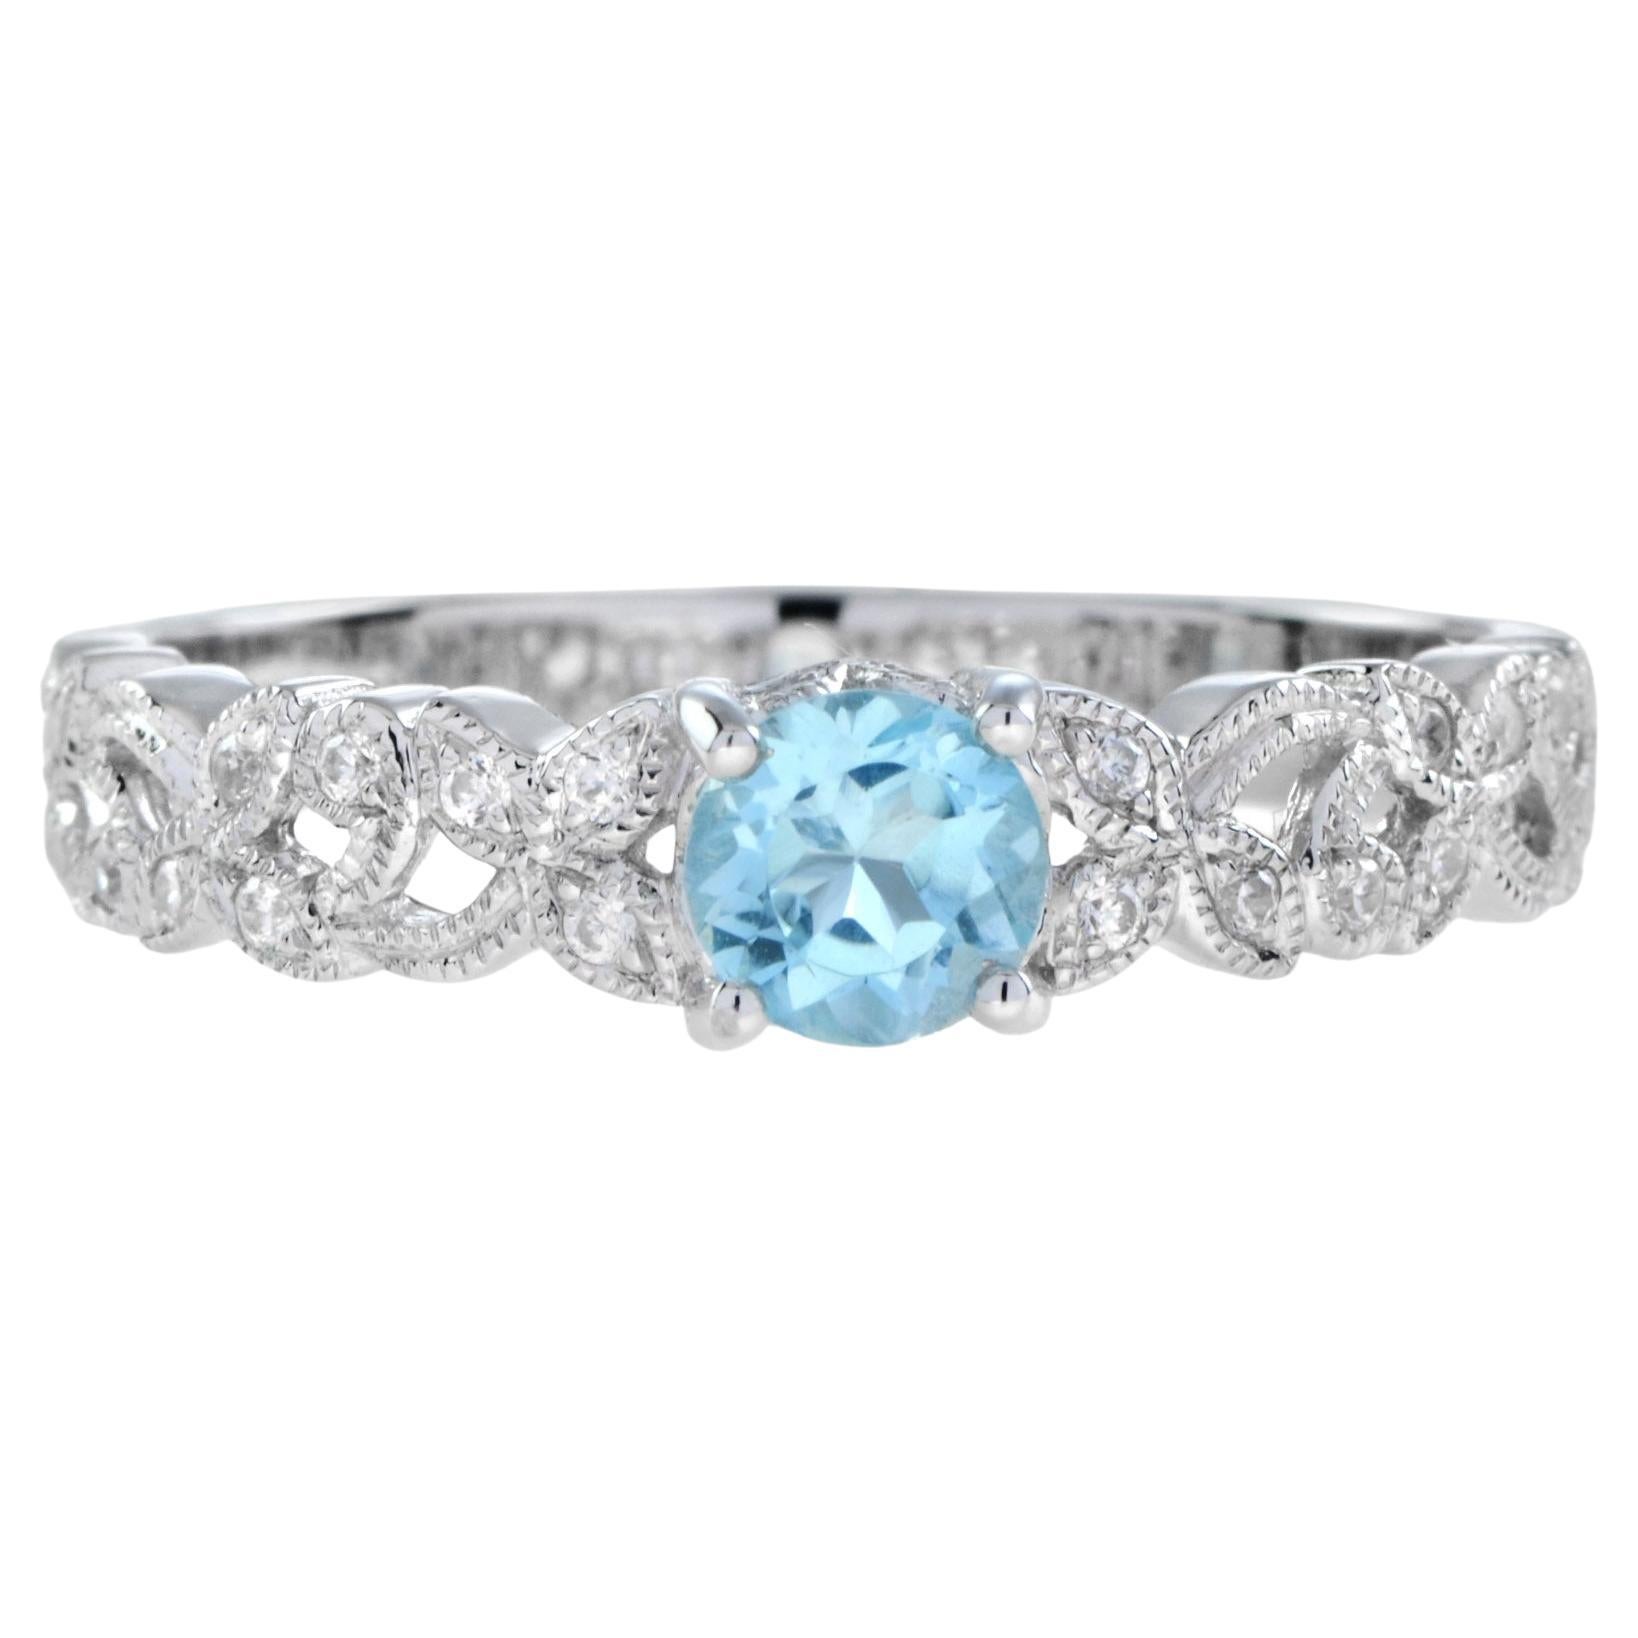 For Sale:  One Round Blue Topaz with Diamond Filigree Band Ring in 14K White Gold